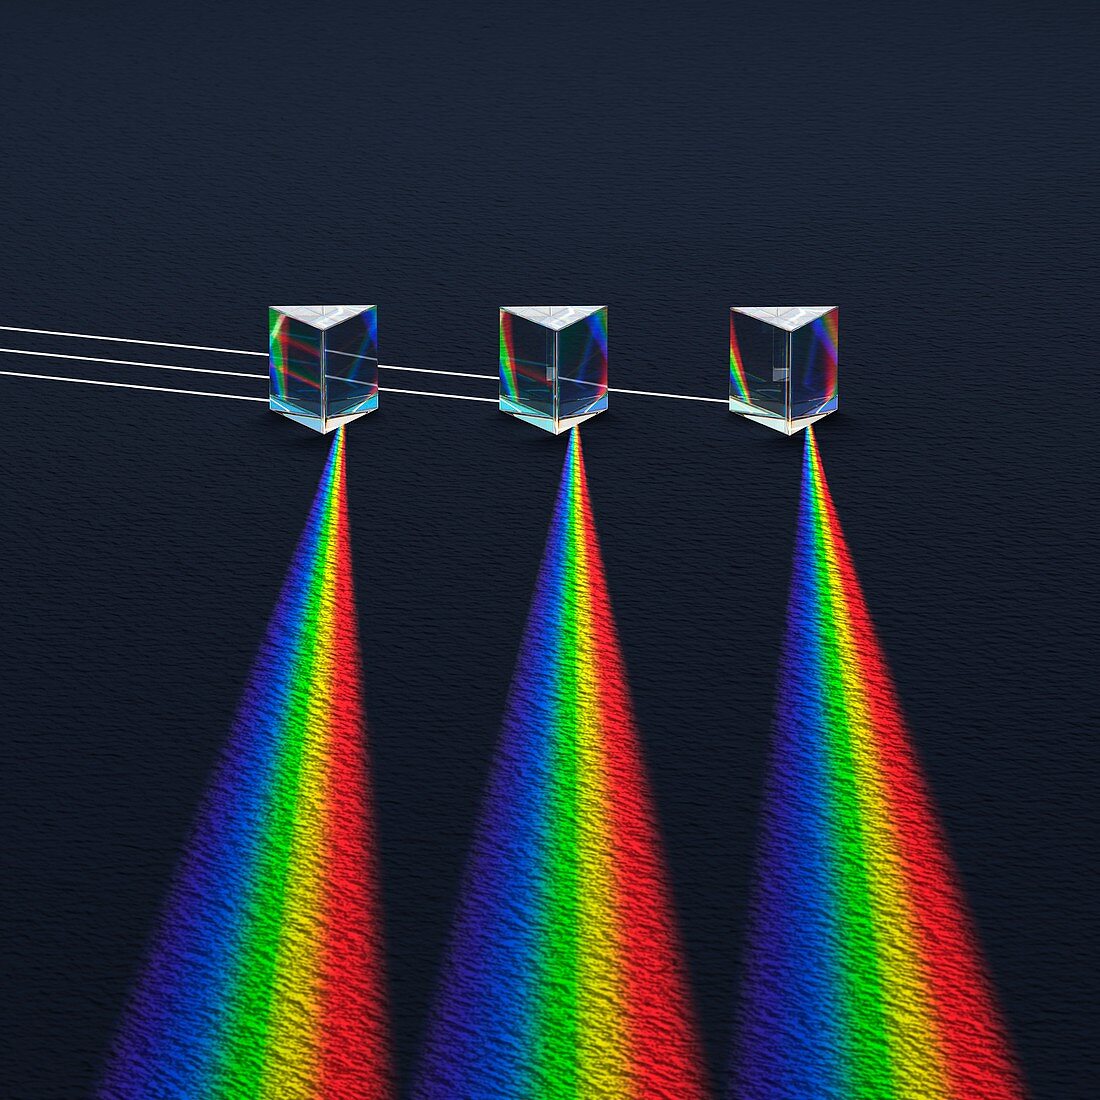 3 Prisms with refracted sprectra